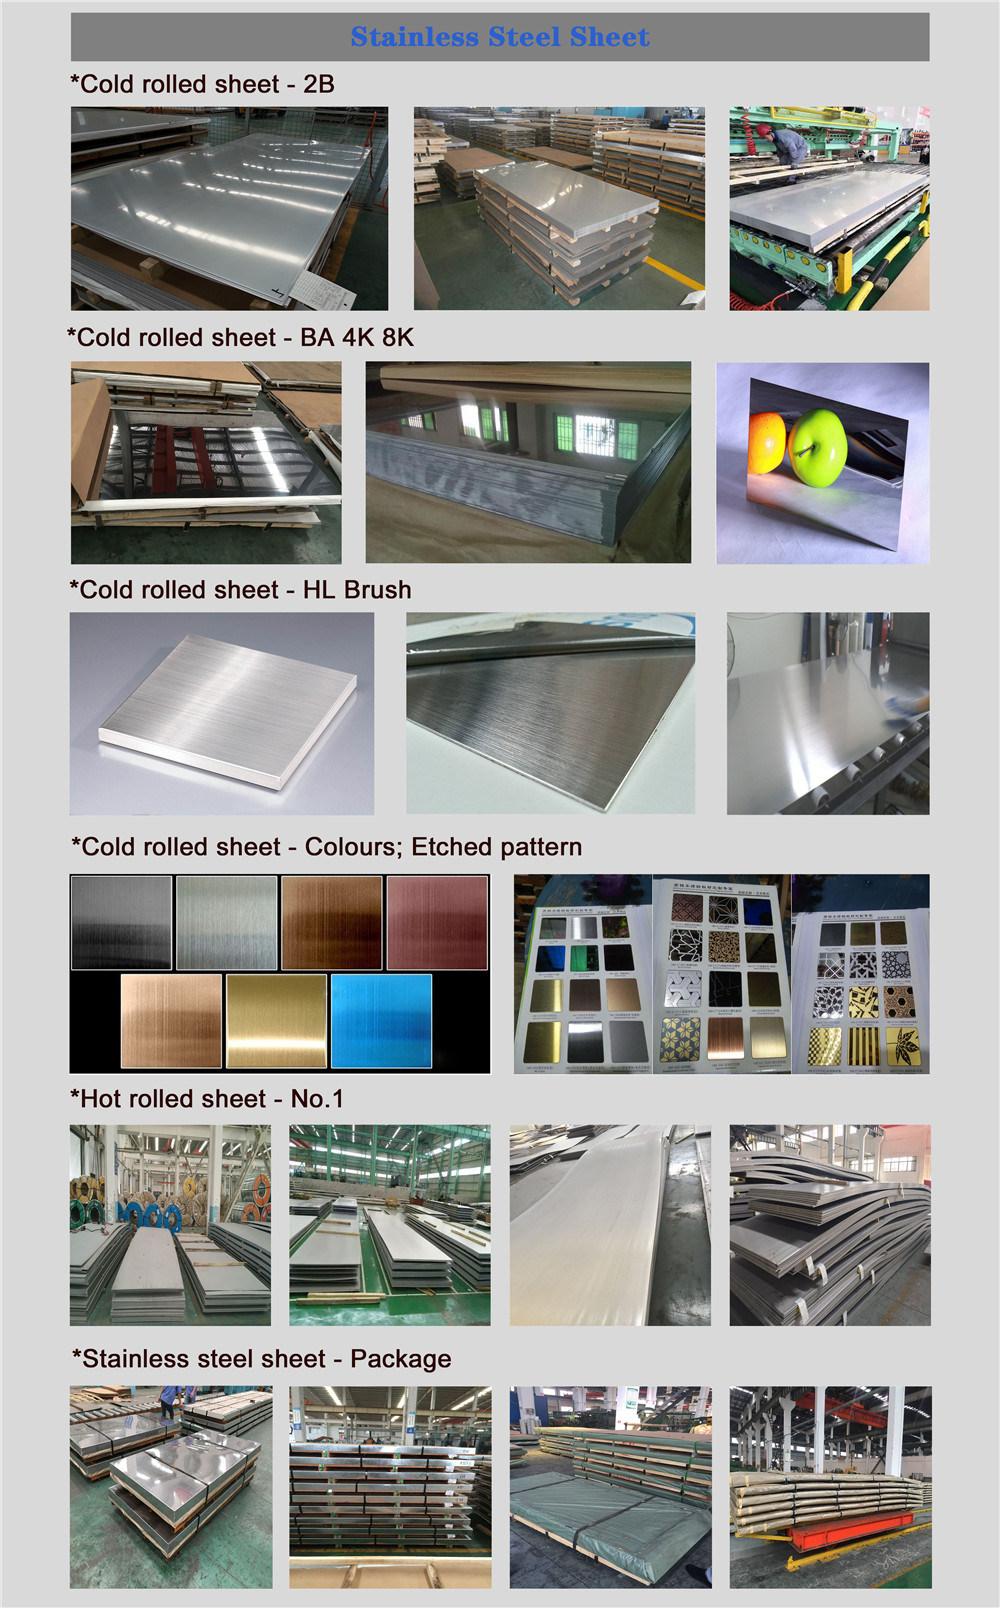 China Big Factory Good Price Cold Rolled 304 304L 321 Stainless Steel Sheet Brushed Hl Prices Per Kg